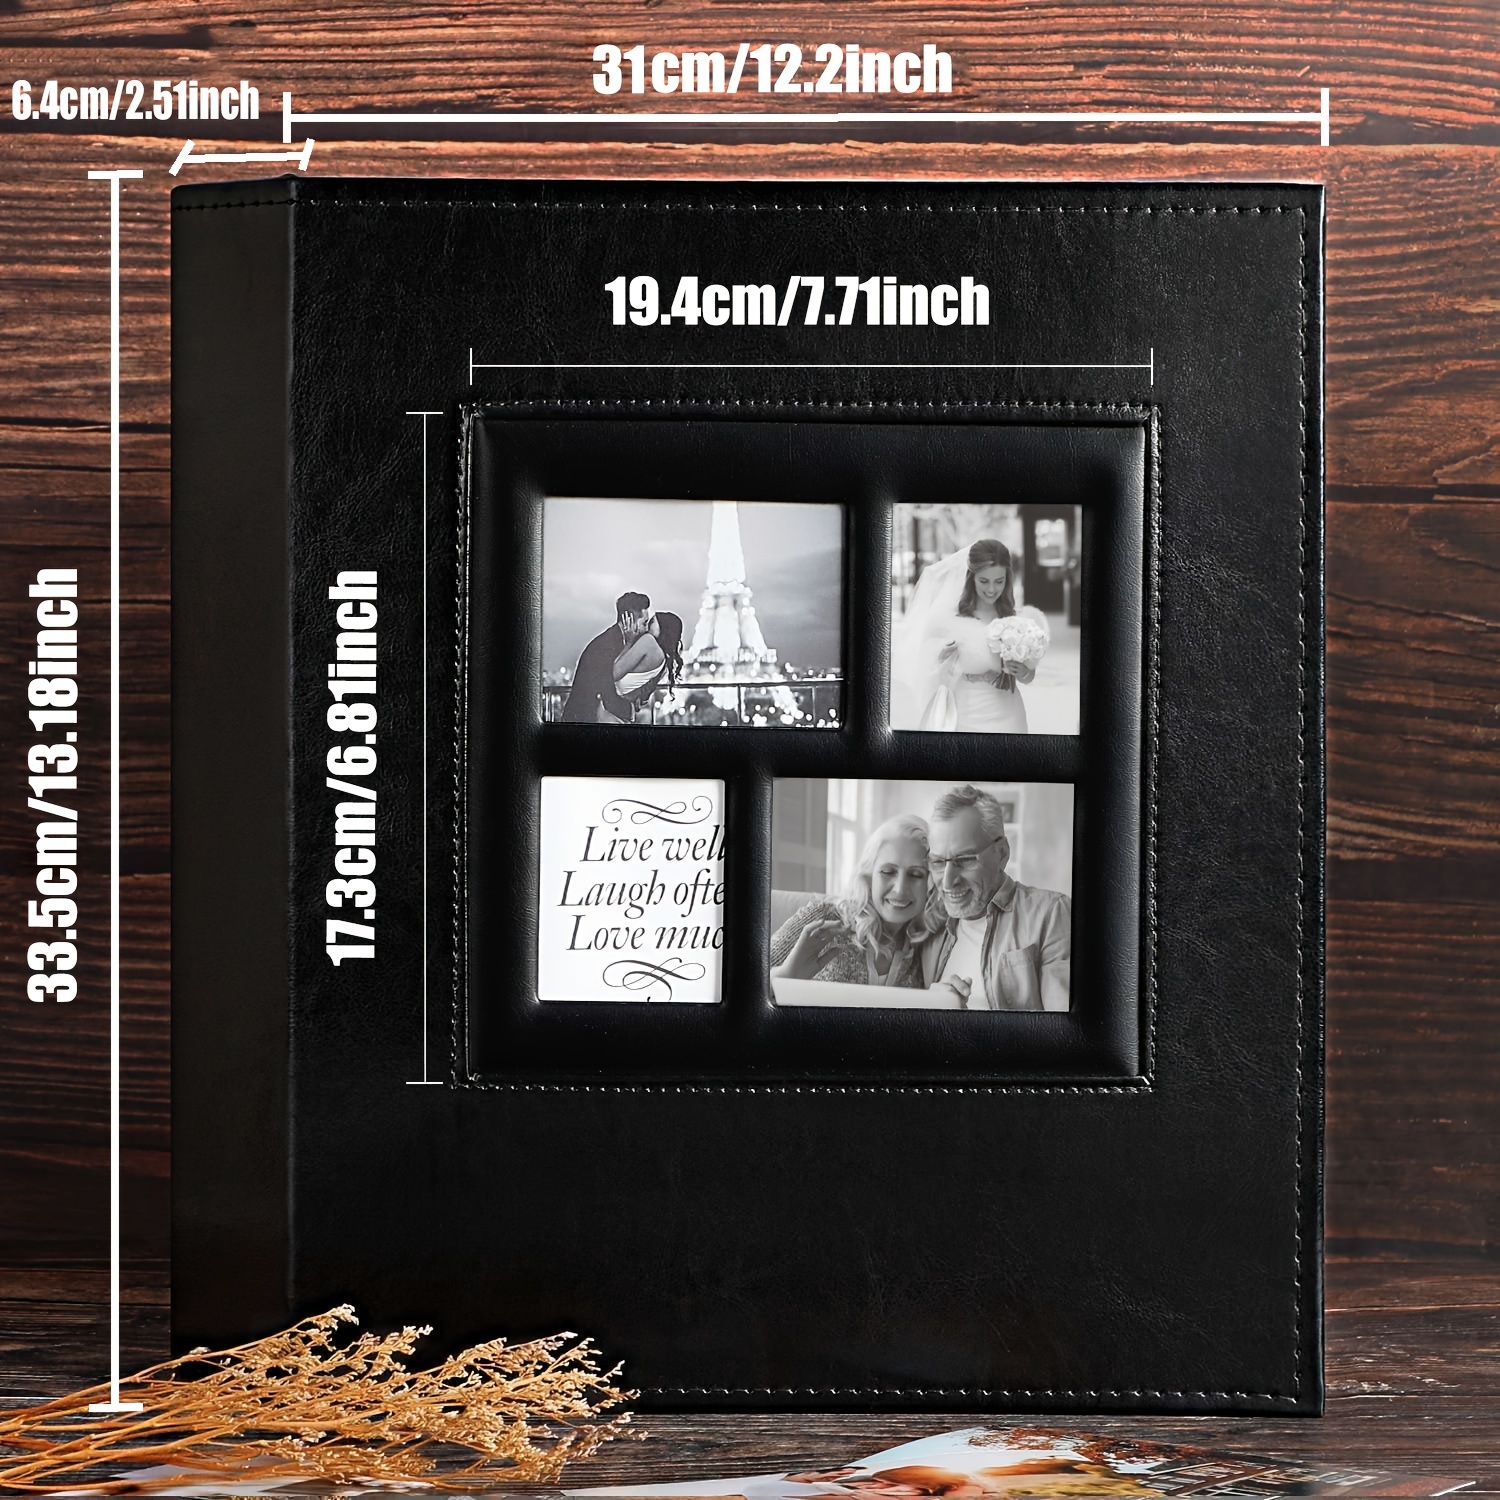 Photo Picutre Album 4x6 500 Photos, Extra Large Capacity Leather Cover  Wedding Family Photo Albums Holds 500 Horizontal and Vertical 4x6 Photos  with